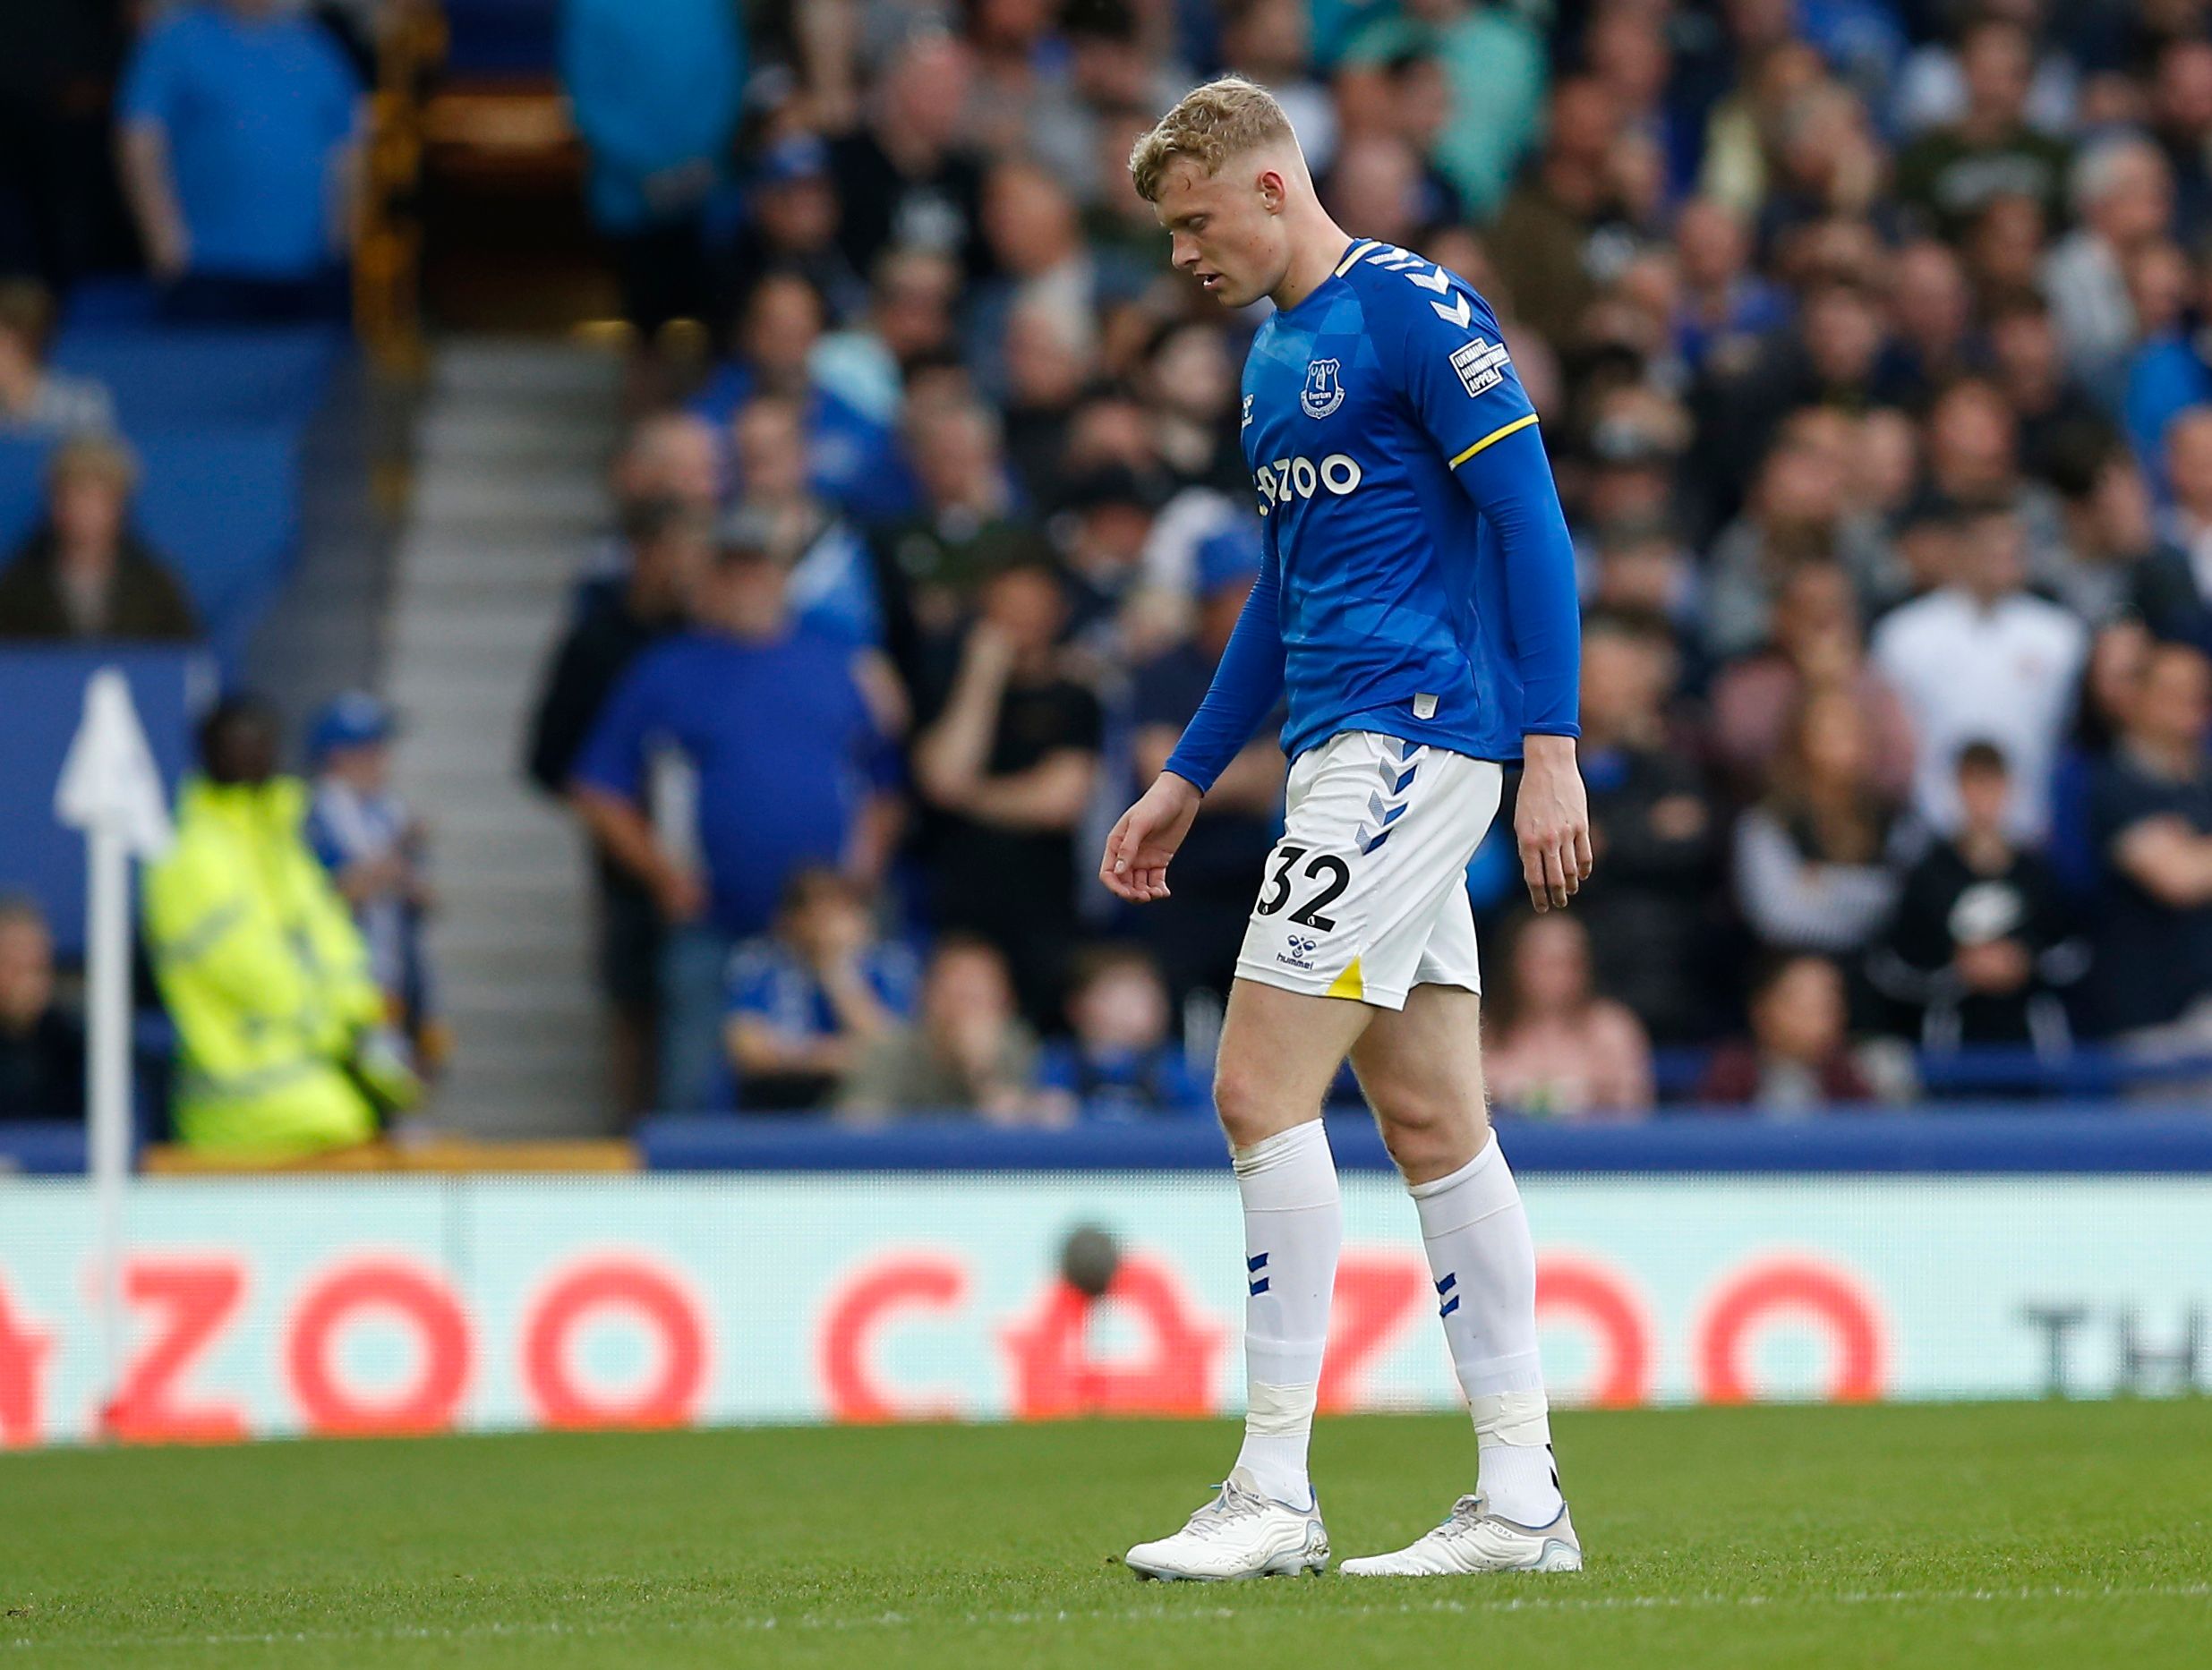  Jarrad Branthwaite, a young English defender, looks dejected after playing for Everton in a Premier League match against Manchester United at Goodison Park.